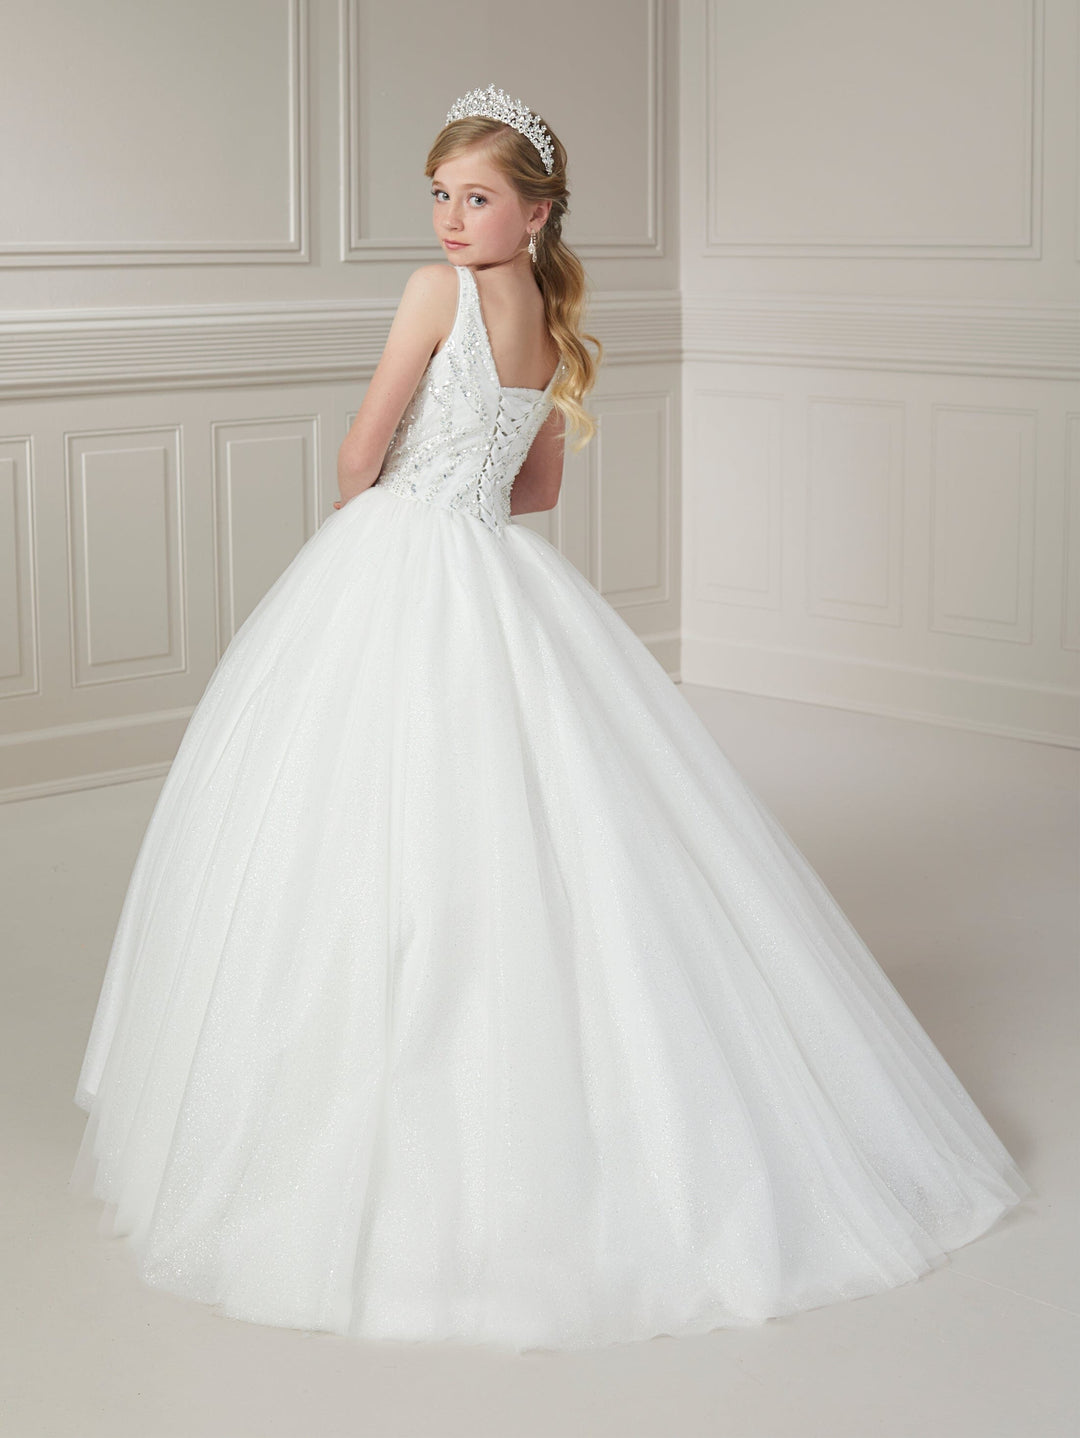 Girls Cape Sleeve Tulle Gown by Tiffany Princess 13728